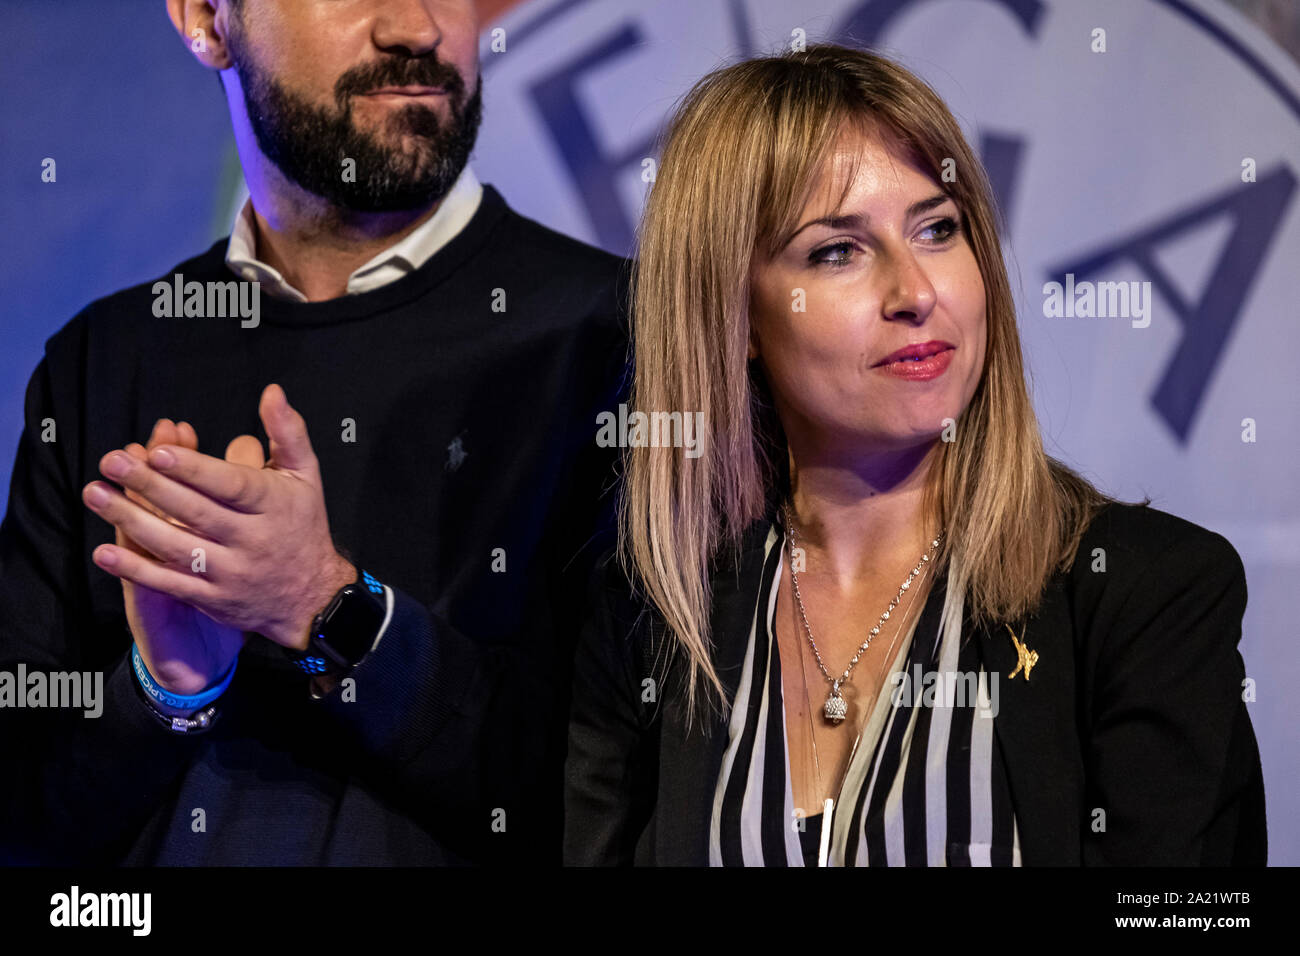 Ascoli Piceno, Italy. 29th Sep, 2019. The Lega party organized the regional conference for the Marche region in Ascoli Piceno. The secretary Matteo Salvini and various national figures of the party were present. | Giorgia Latini. (Photo by Andrea Vagnoni/Pacific Press) Credit: Pacific Press Agency/Alamy Live News Stock Photo